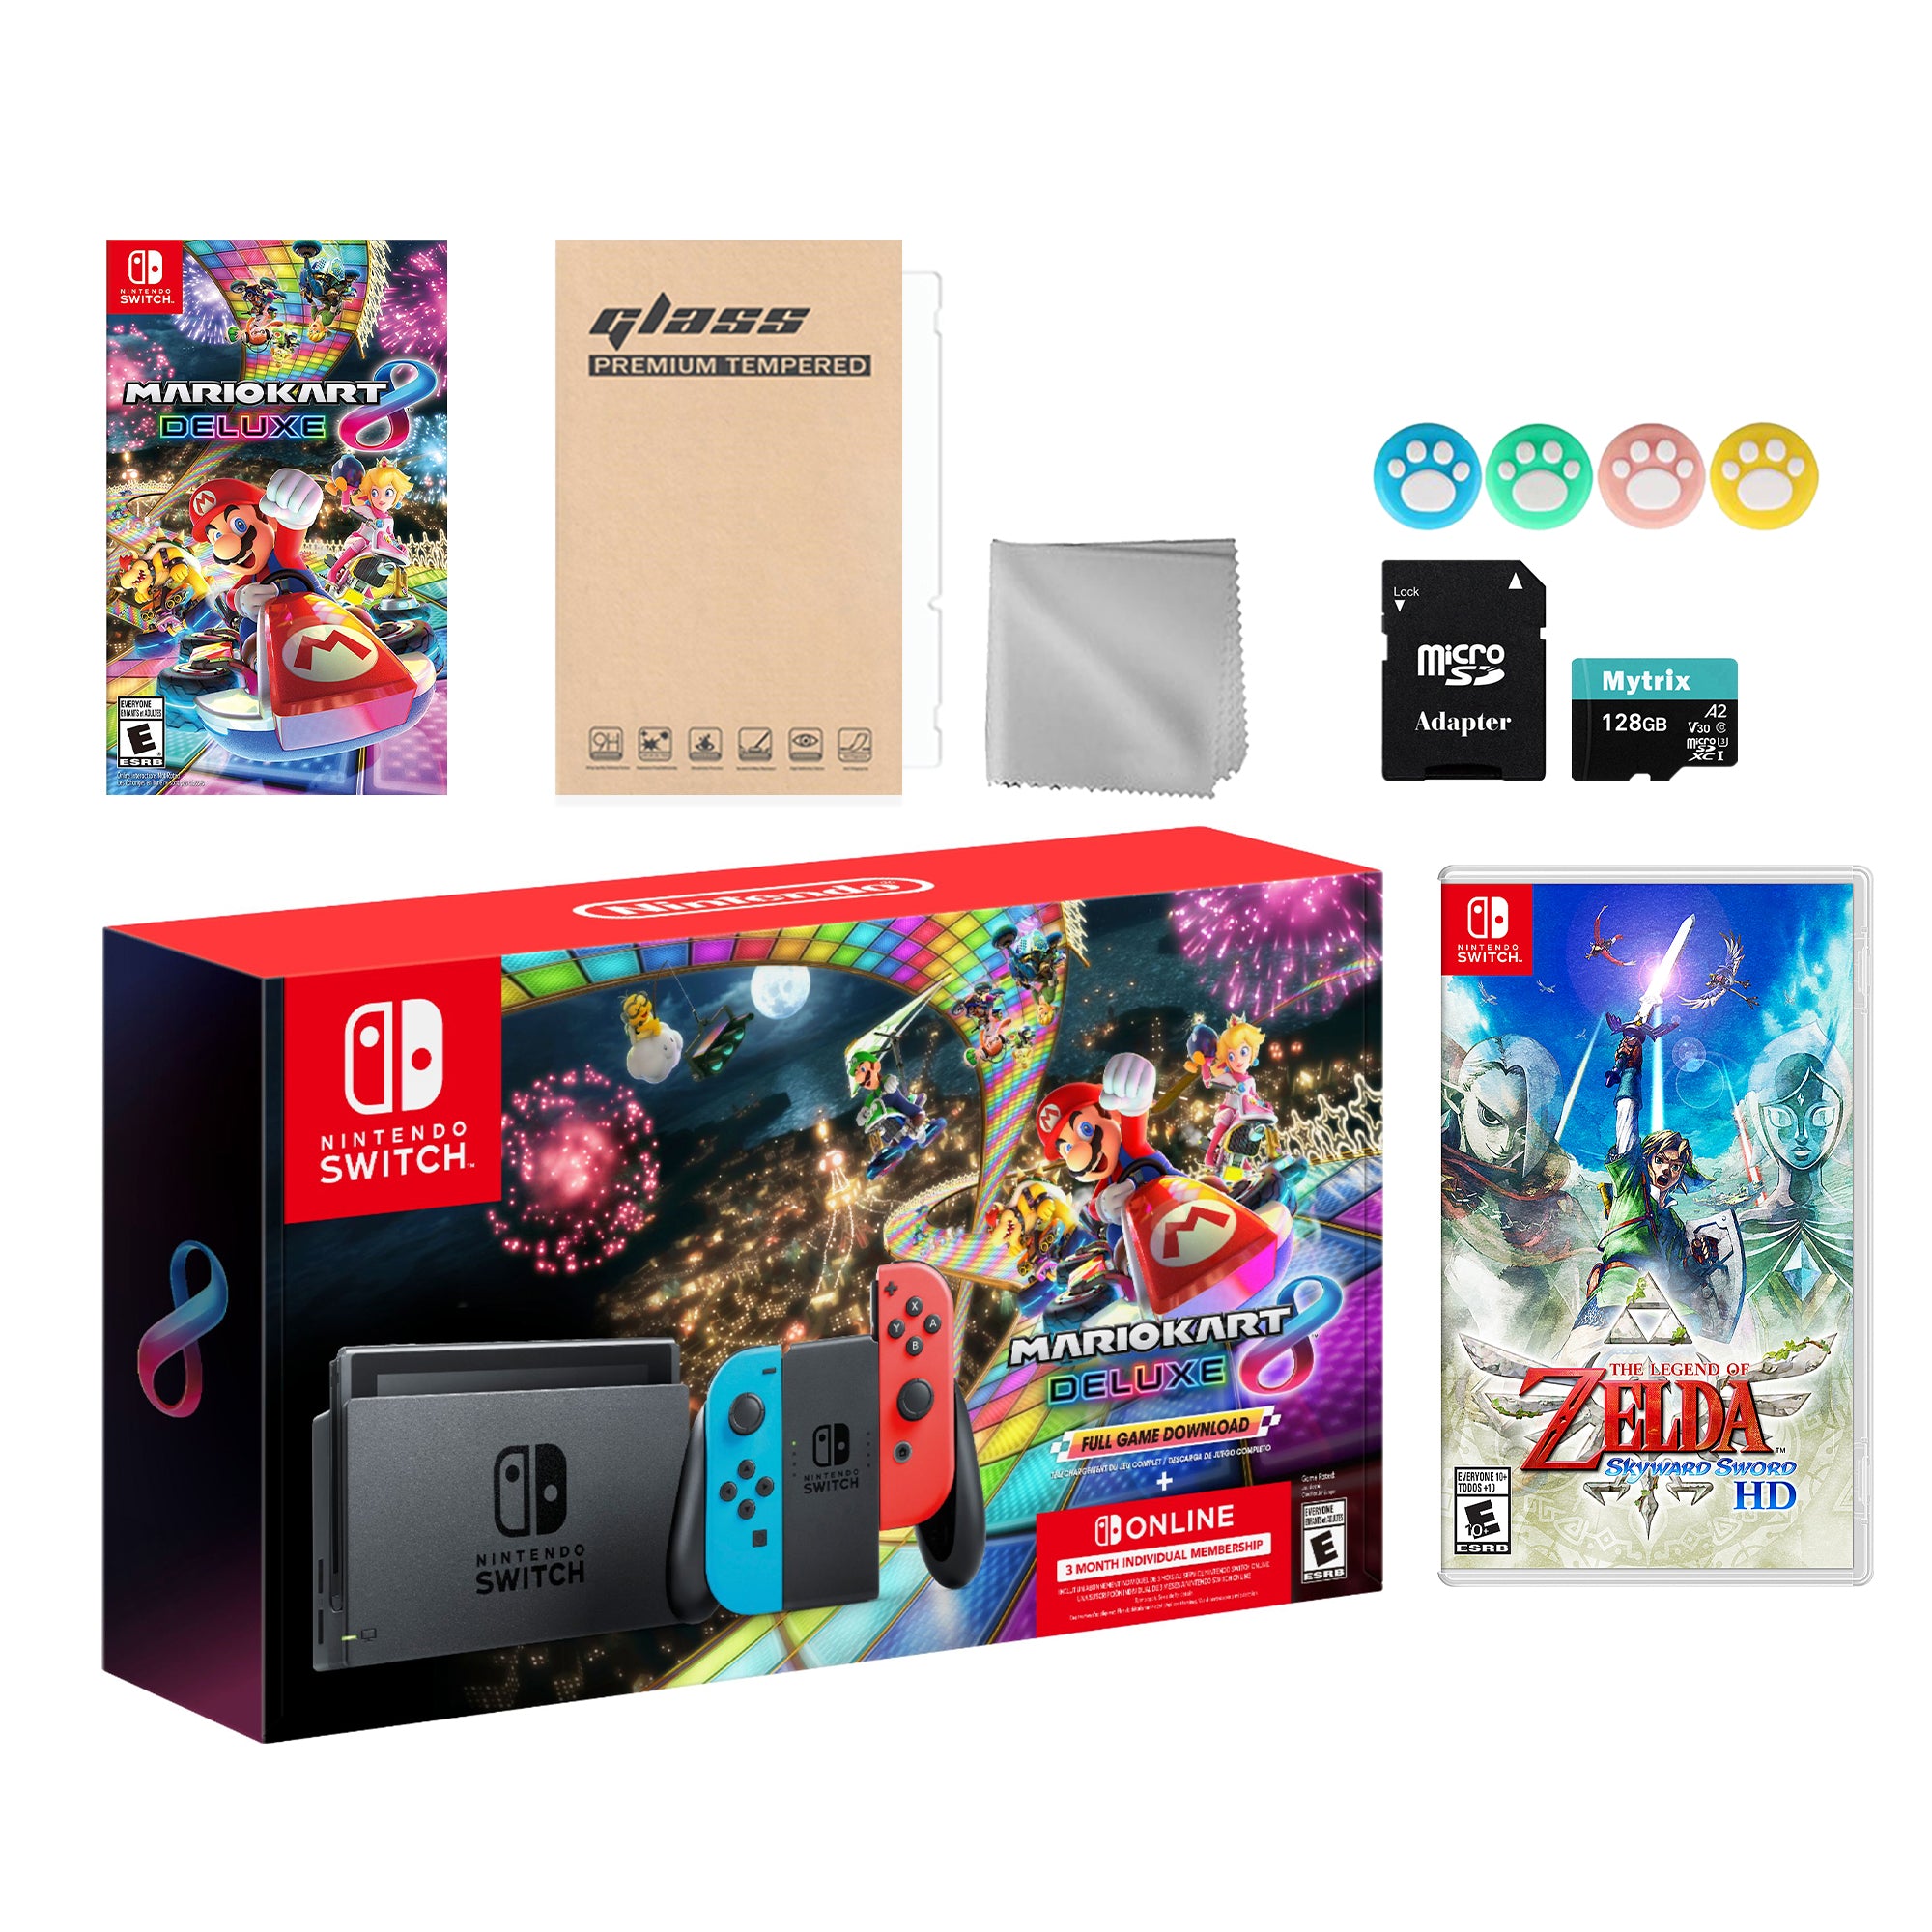 Nintendo Switch Mario Kart 8 Deluxe Bundle: Red Blue Console, Mario Kart 8 & Membership, The Legend of Zelda: Skyward Sword HD, Mytrix 128GB MicroSD Card and Accessories